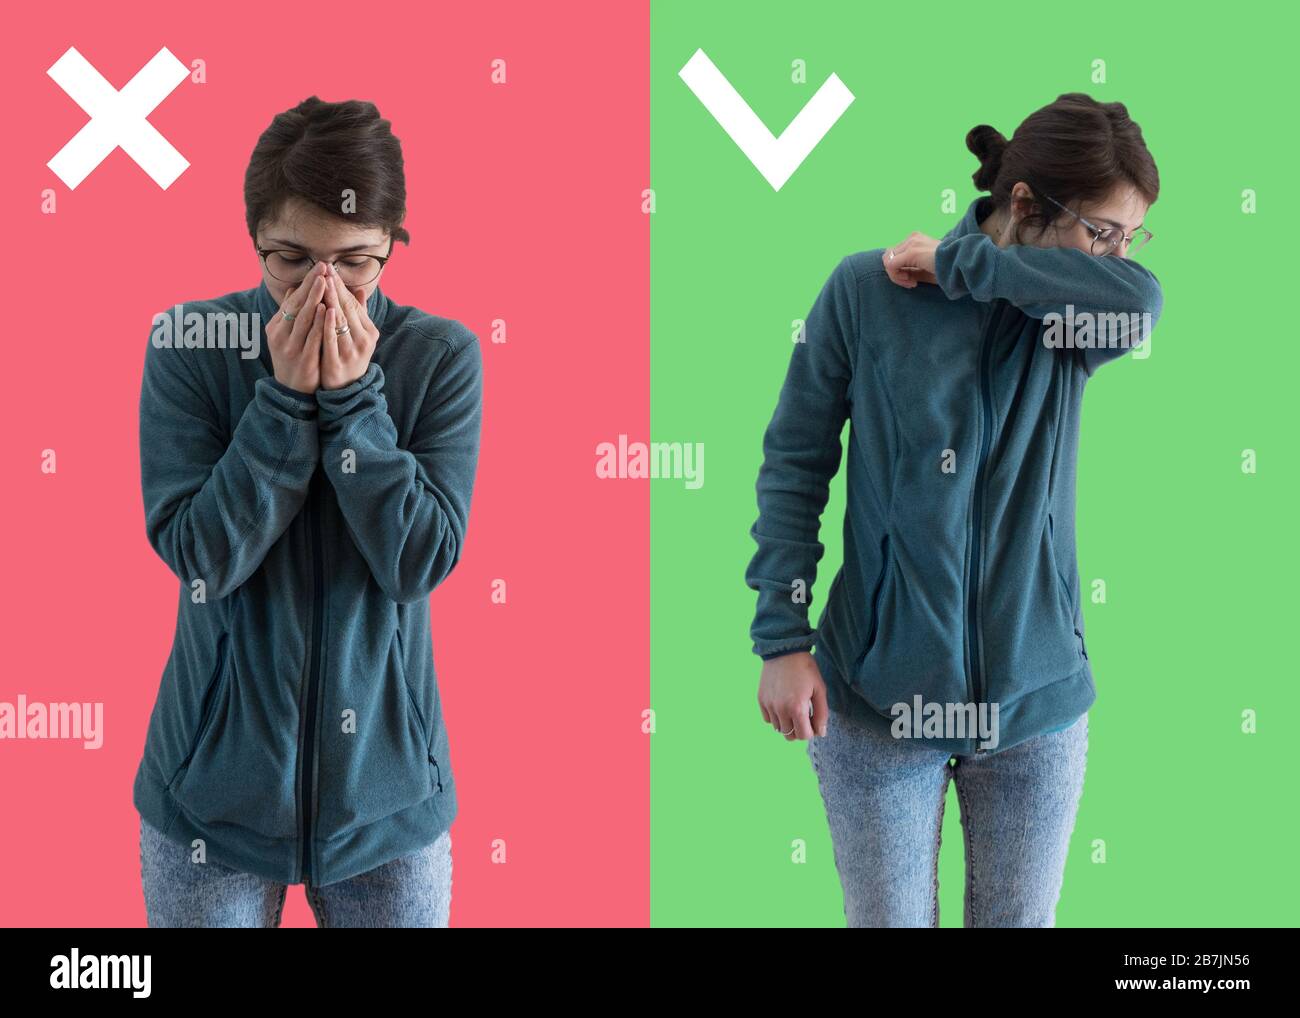 Comparison between wrong and right way to sneeze to prevent virus infection. Caucasian woman isolated on colored background sneezing,coughing into her Stock Photo